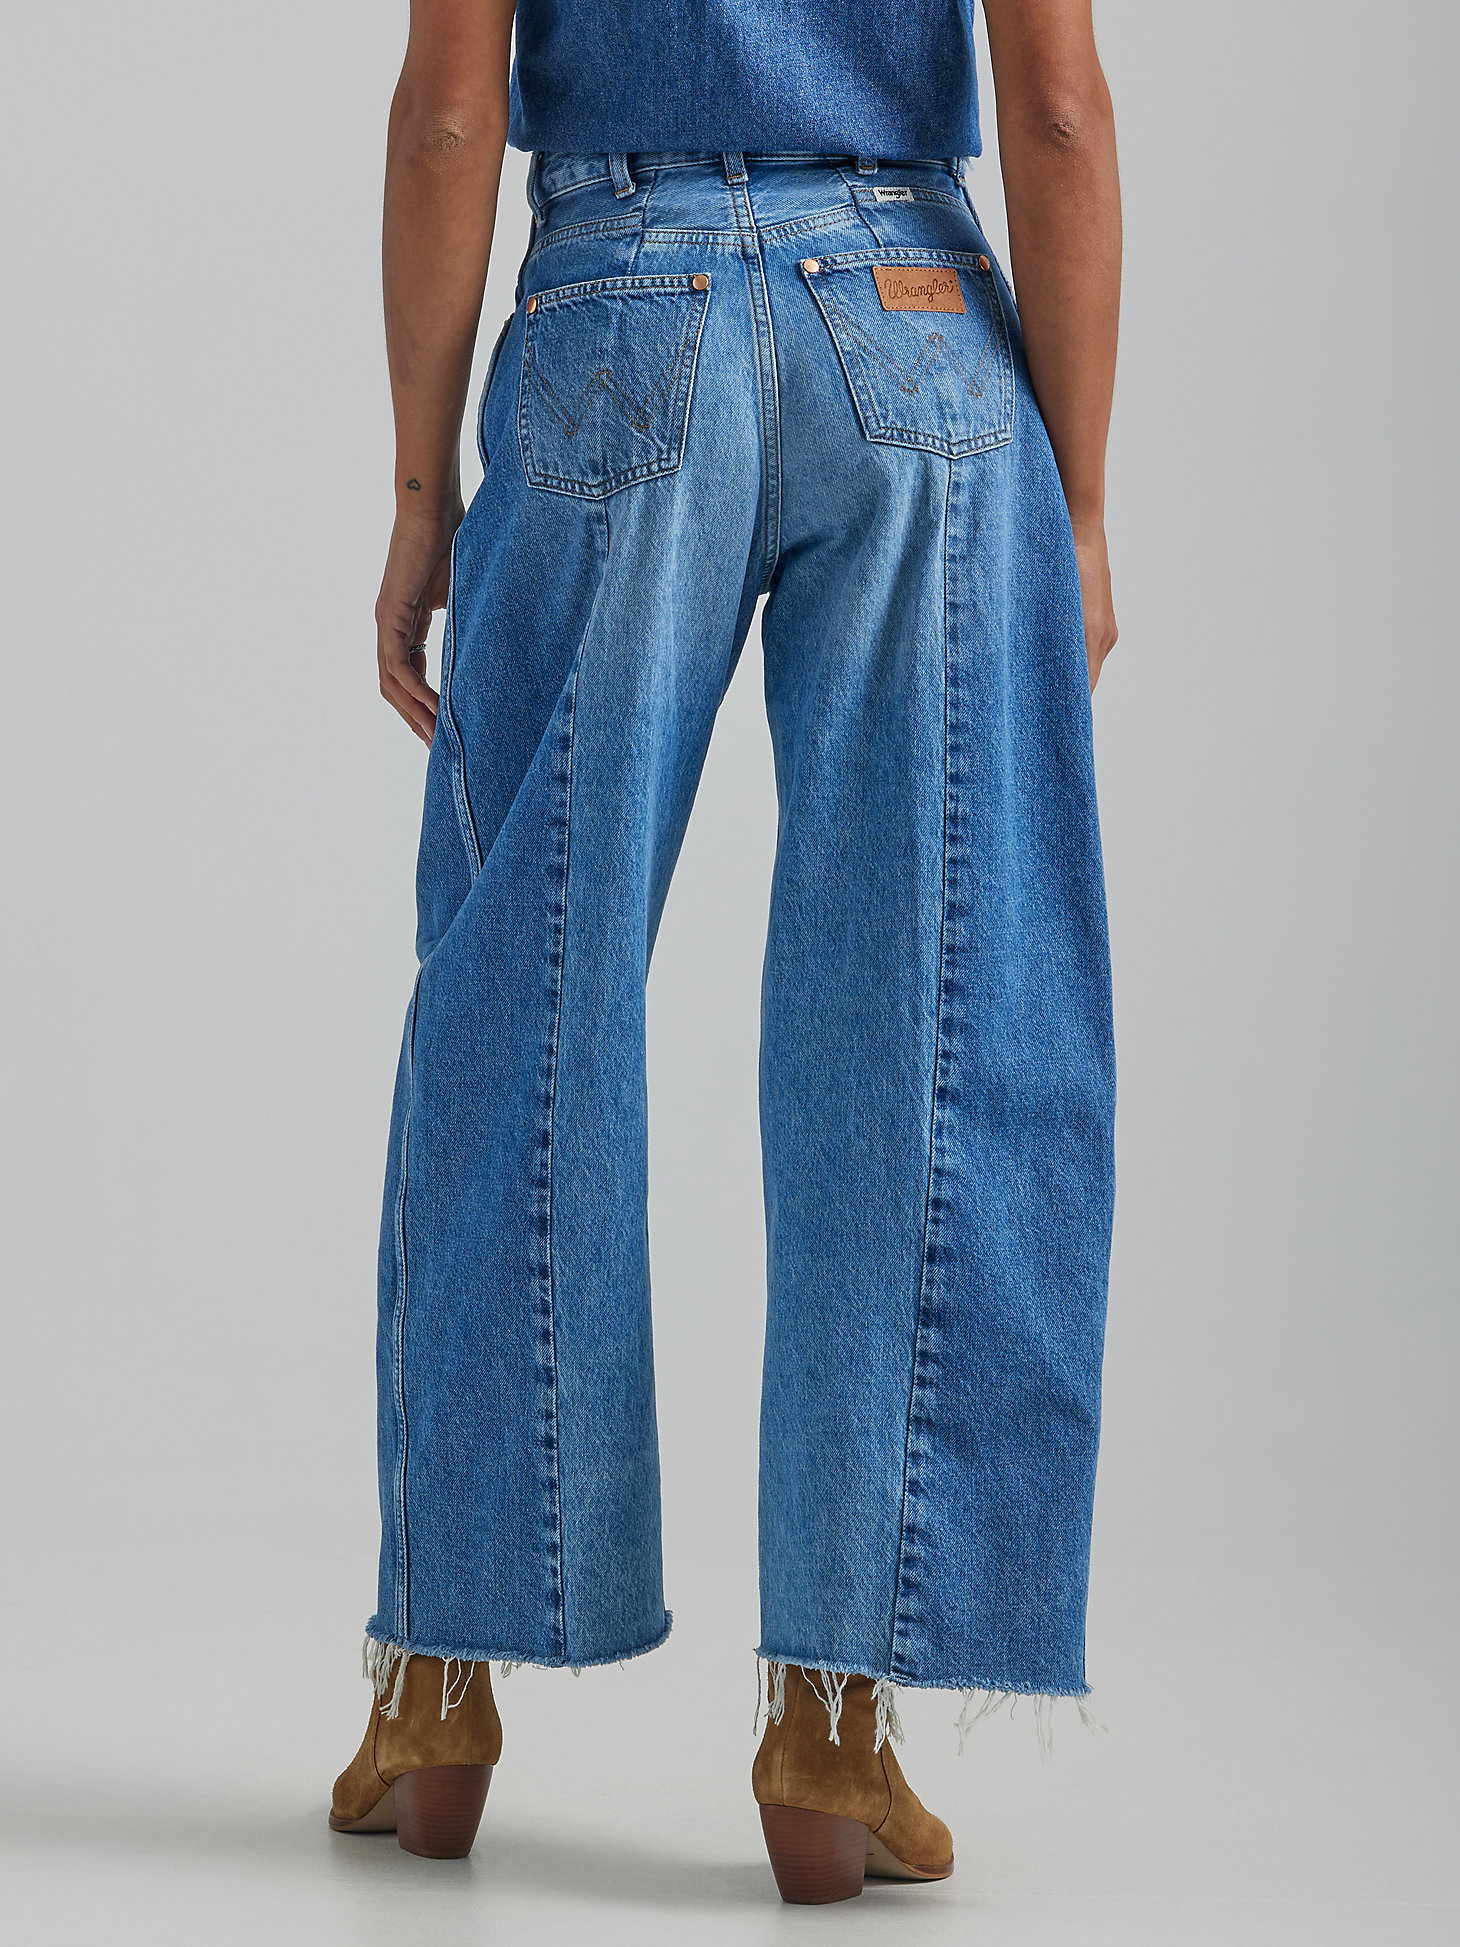 Women's Colorblock Cowboy Jean in Together Again alternative view 10